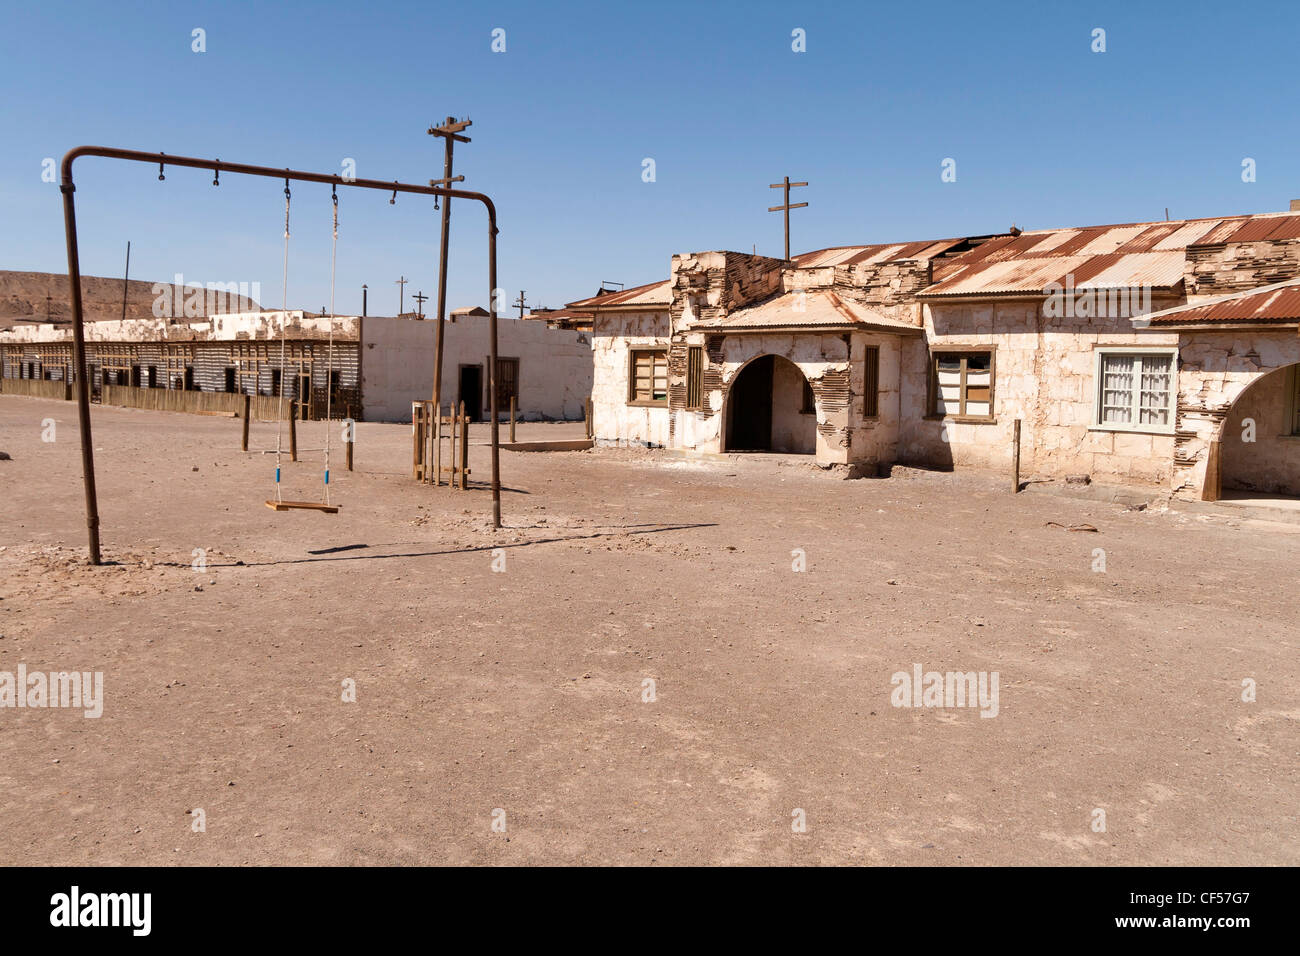 Humberstone saltpeter works (UNESCO world heritage), Chile, old ghost mining town and factory (Atacama desert) Stock Photo